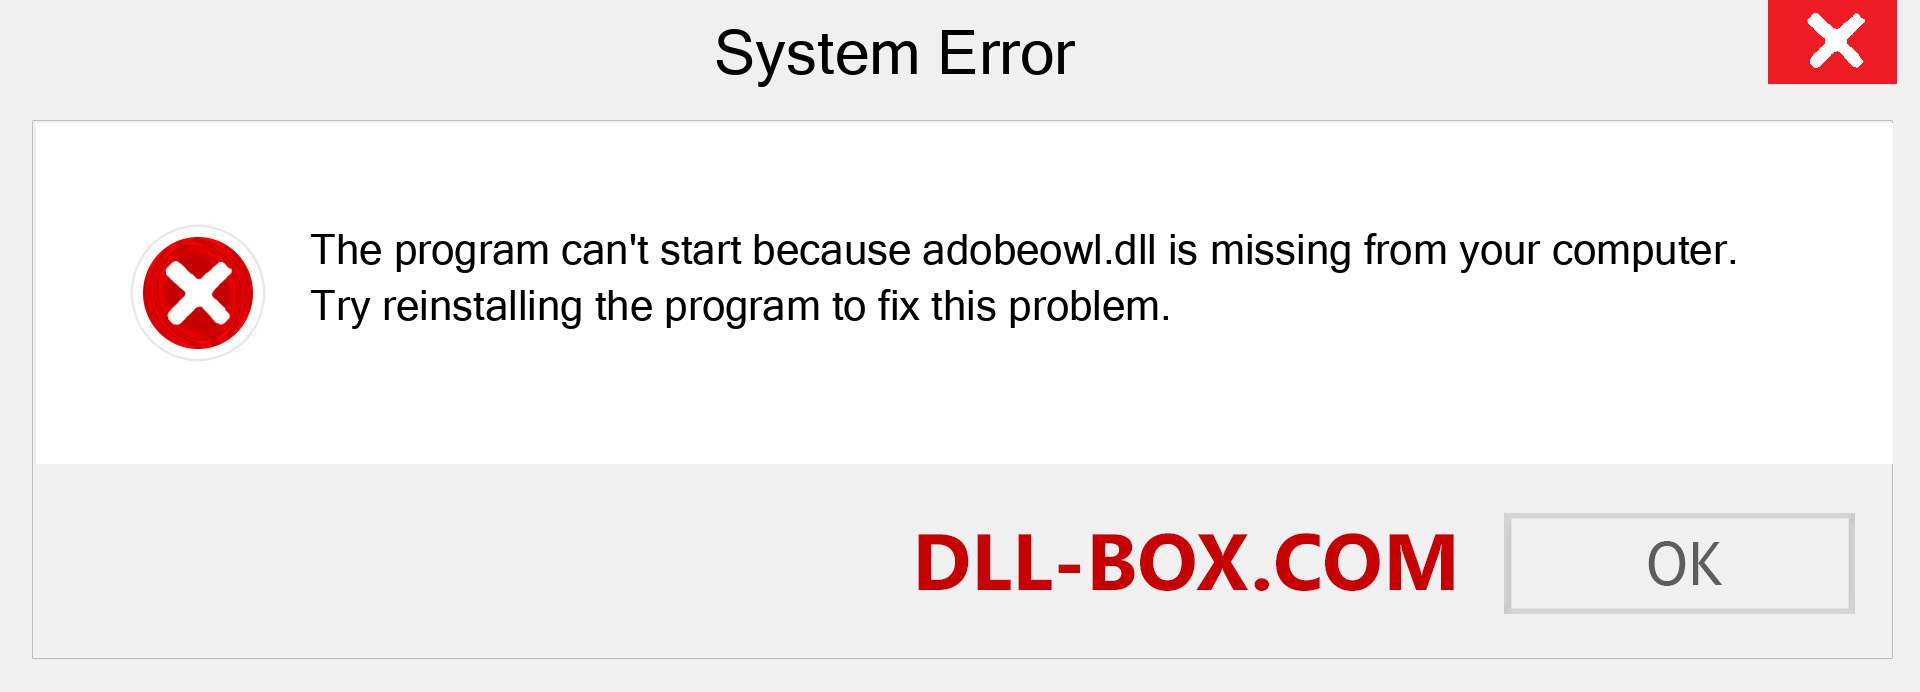  adobeowl.dll file is missing?. Download for Windows 7, 8, 10 - Fix  adobeowl dll Missing Error on Windows, photos, images